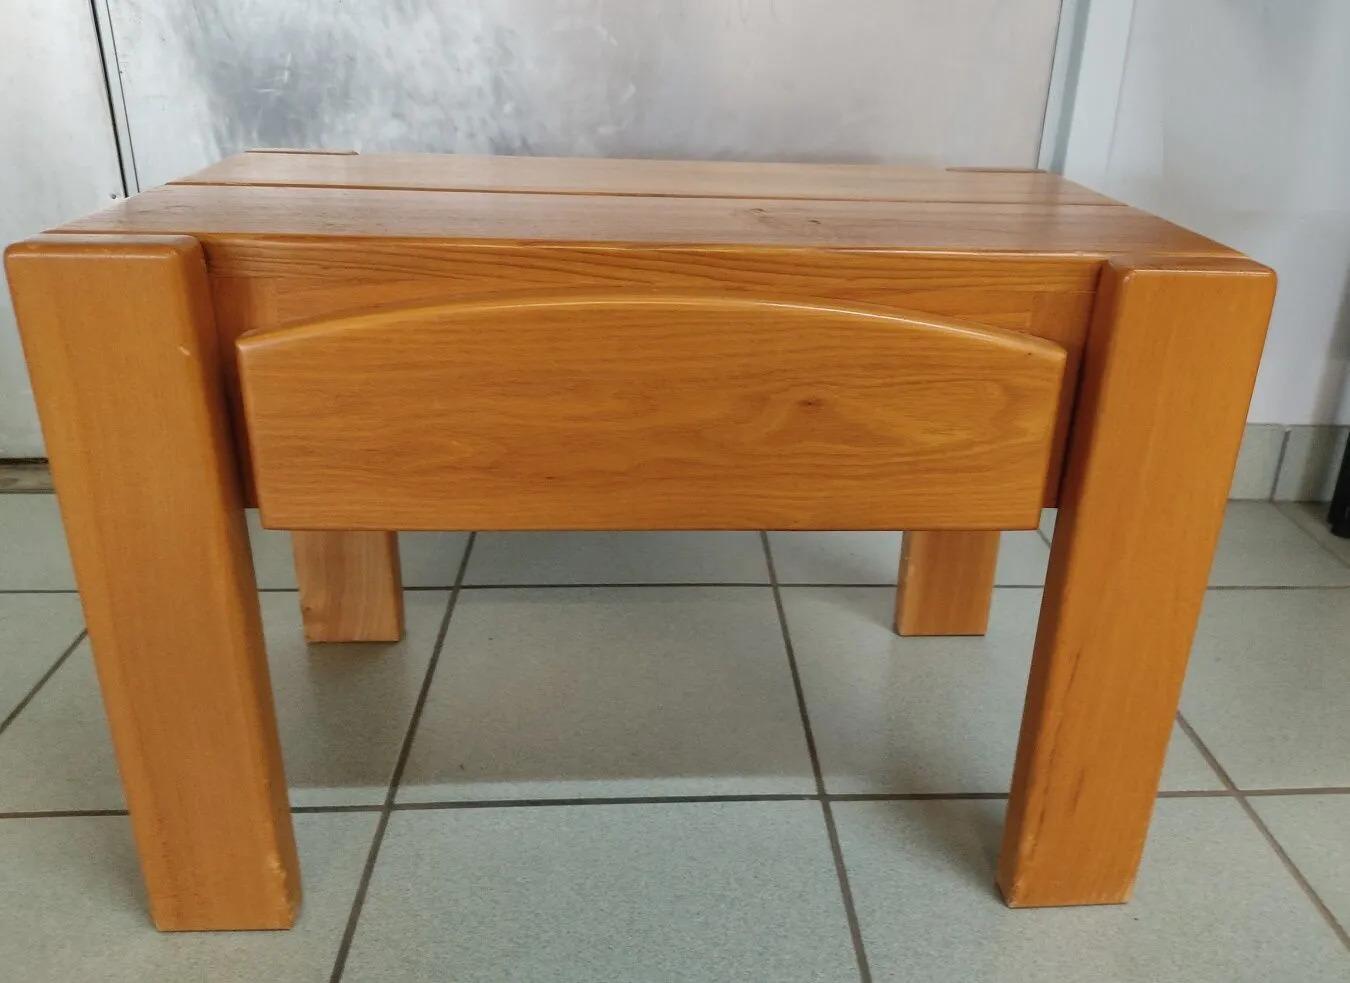 Maison regain 2 bedside tables in solid elm opening with a front drawer. Laying on four rectangular legs. Around 1960.
Pierre Chapo style
Scratches.